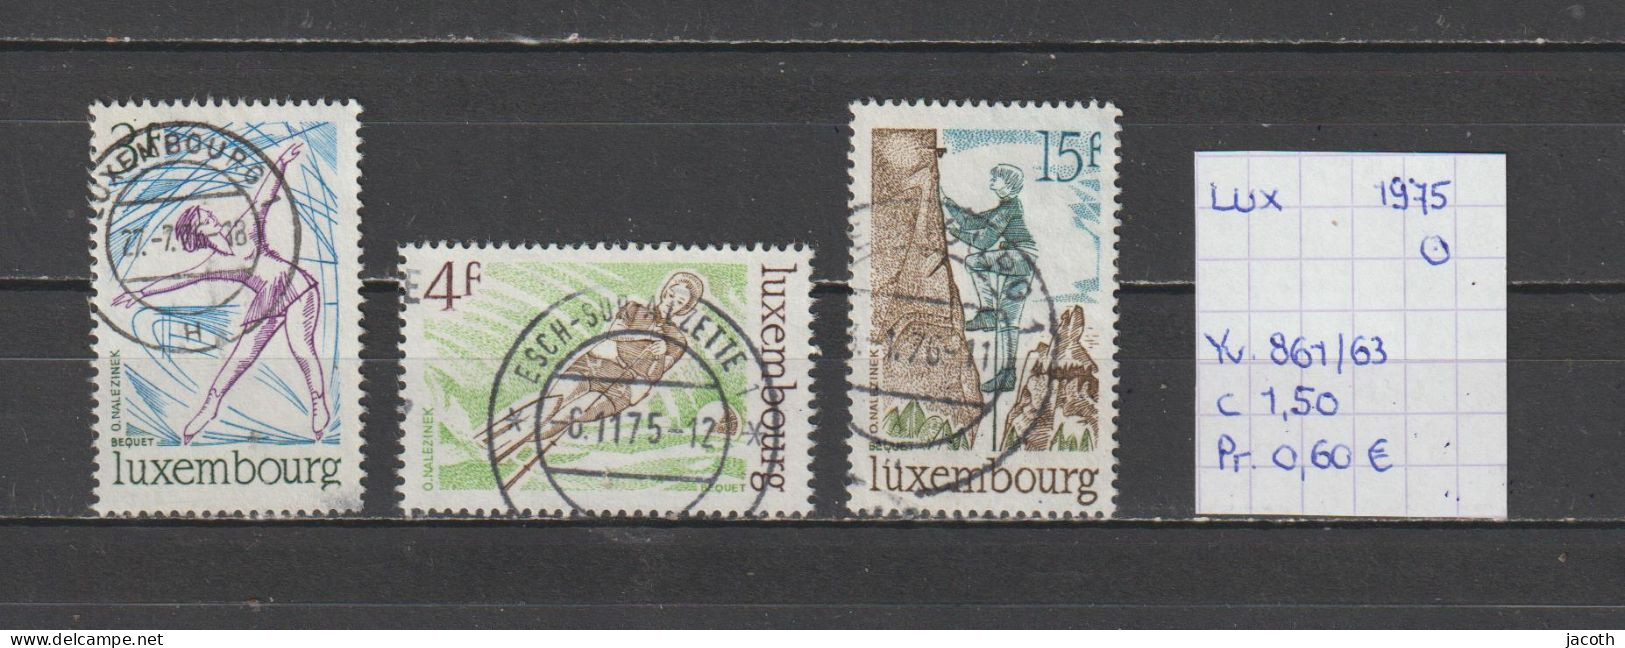 (TJ) Luxembourg 1975 - YT 861/63 (gest./obl./used) - Gebraucht